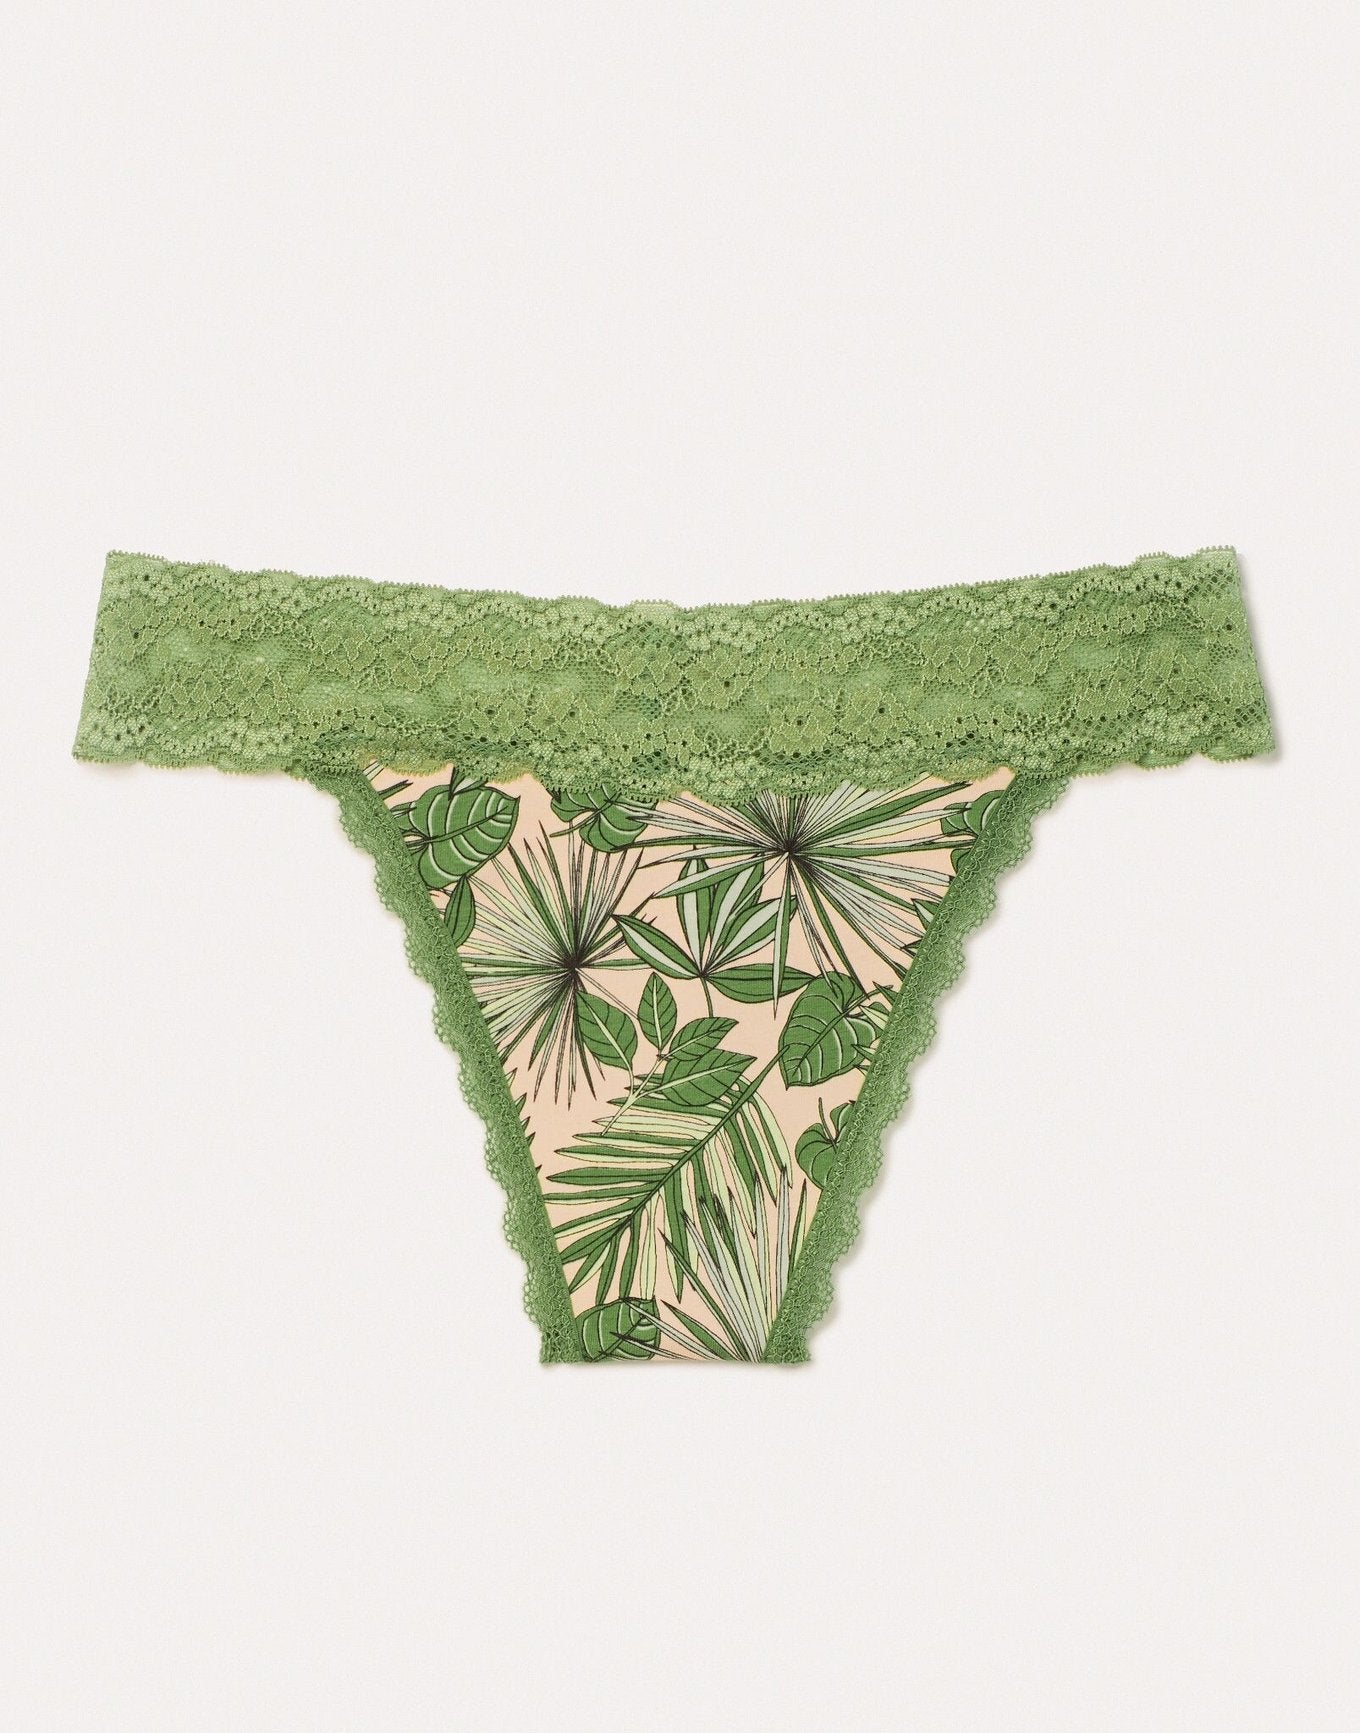 Joyja Lily period-proof panty in color Breezy Palms  and shape thong